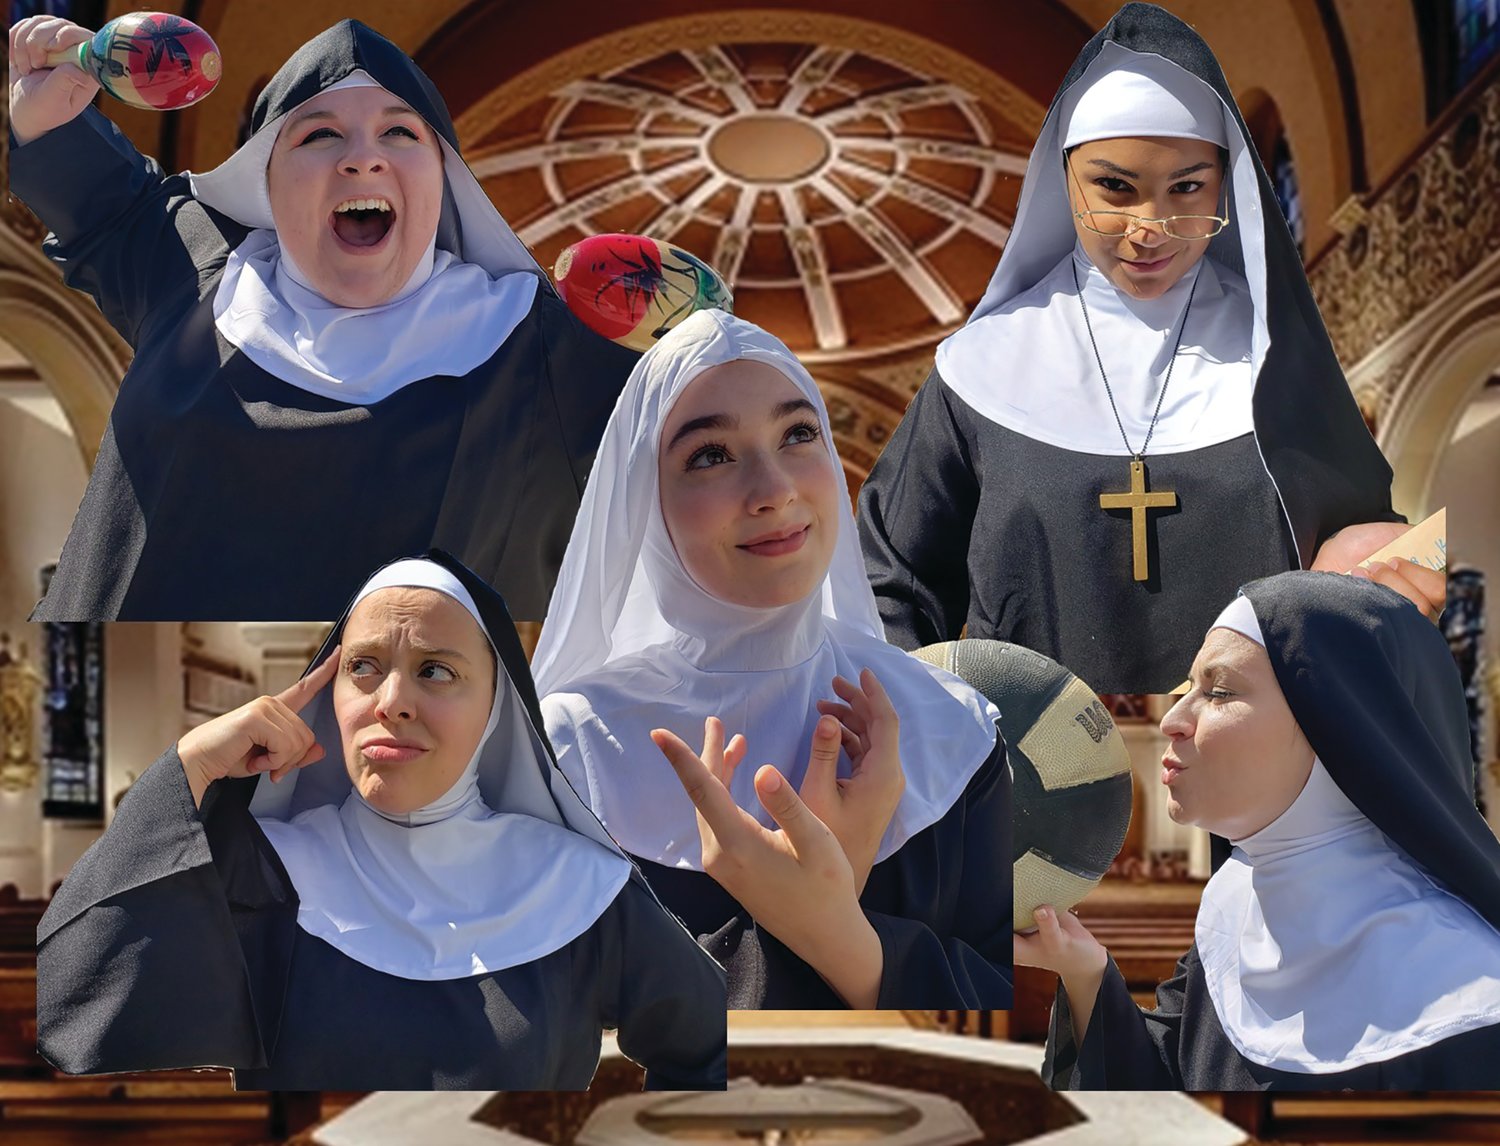 The Little Sisters of Hoboken from left, top, Mary Taylor and Sarah Grace Odom; middle Emmie Wright; and bottom, Elsa Scott Besler and Natalie A. Korbisch prepare for their fundraiser in Nunsense, running from Friday through Oct. 10 at Myers Dinner Theatre in Hillsboro.